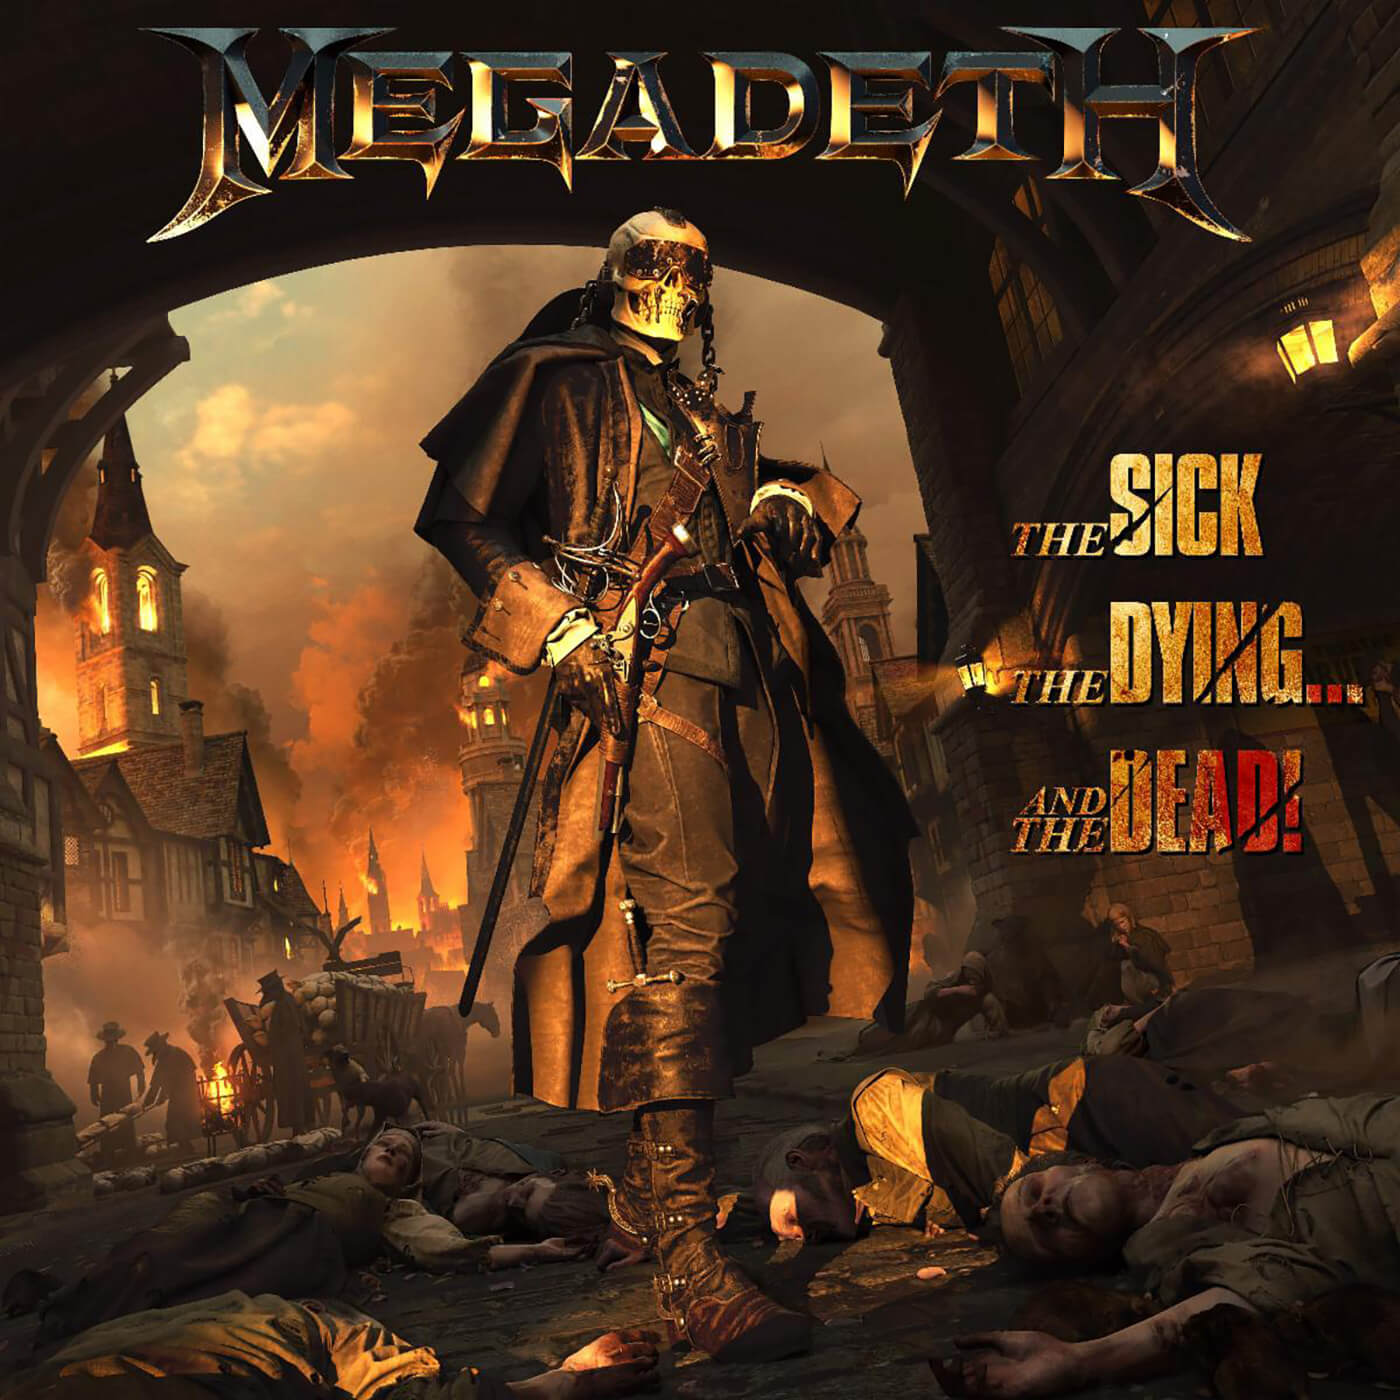 Megadeth - The Sick and the Dying... and the Dead!